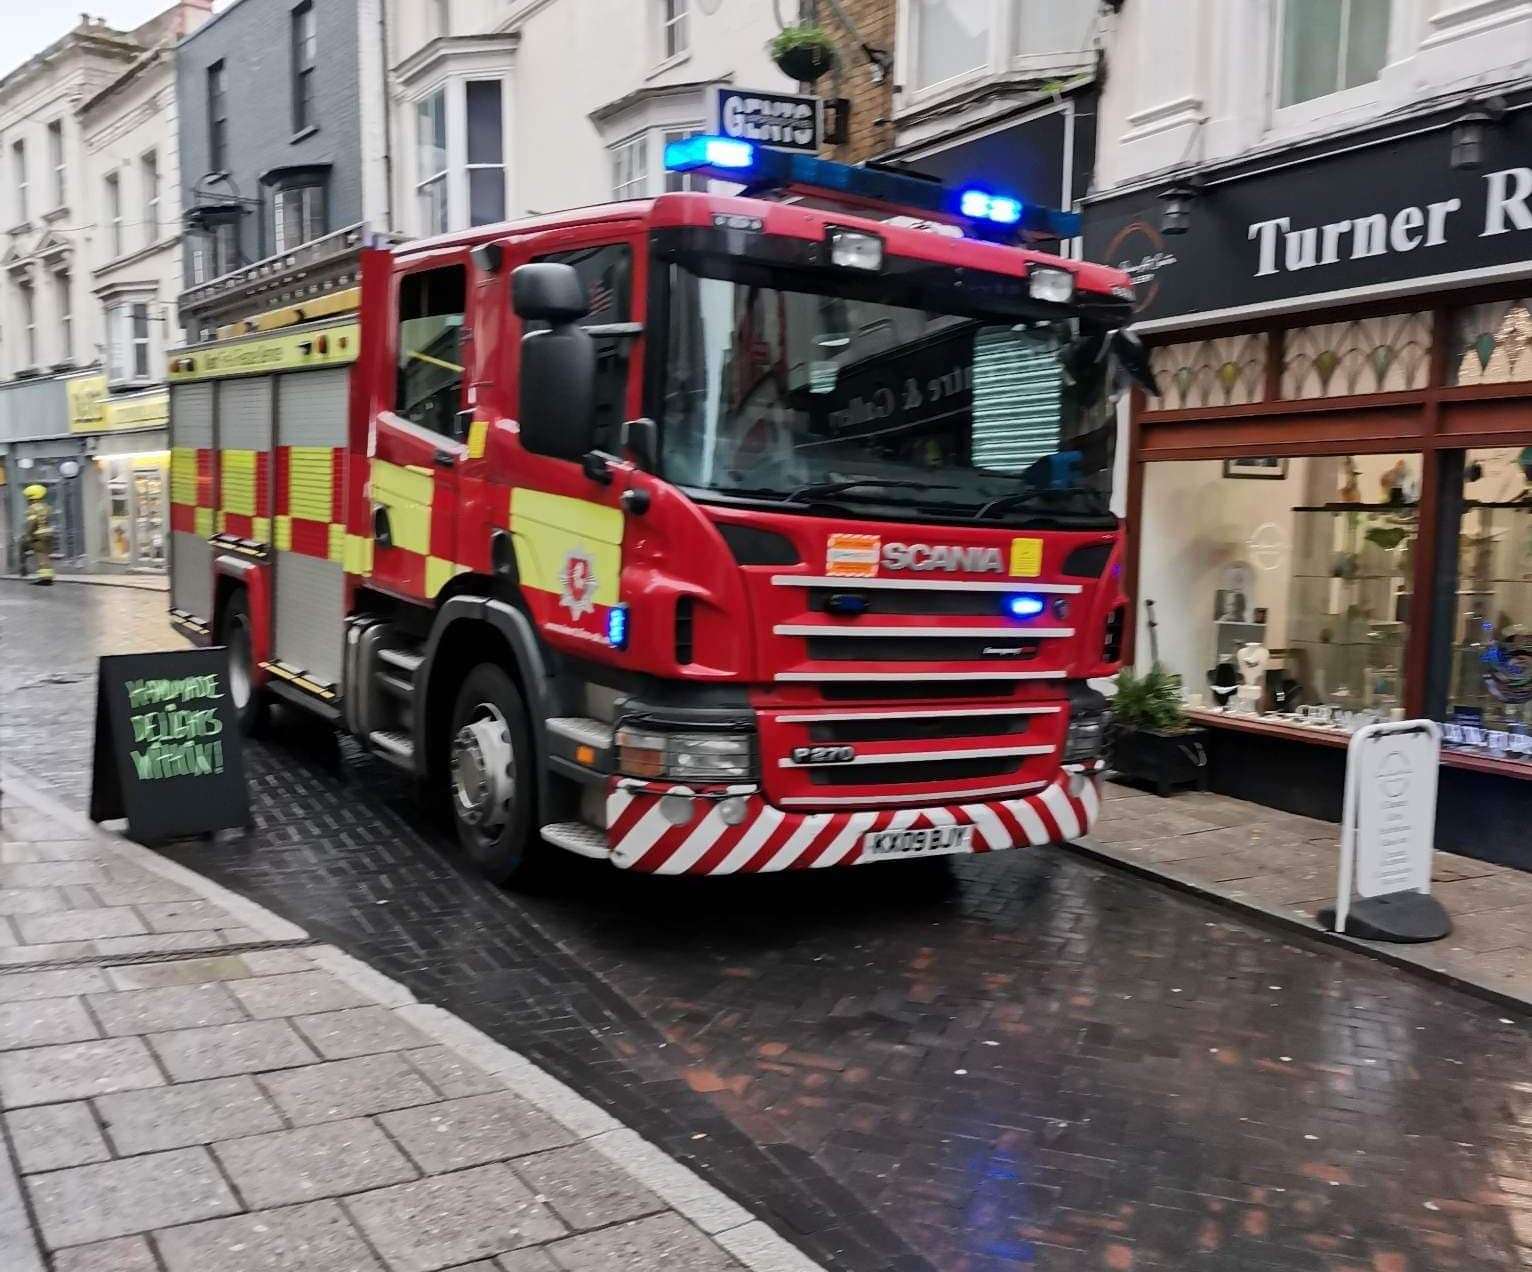 Fire crews in Harbour Street worked all through the afternoon and into the evening to make the area safe. Picture: Turner Rowe Art Centre & Gallery